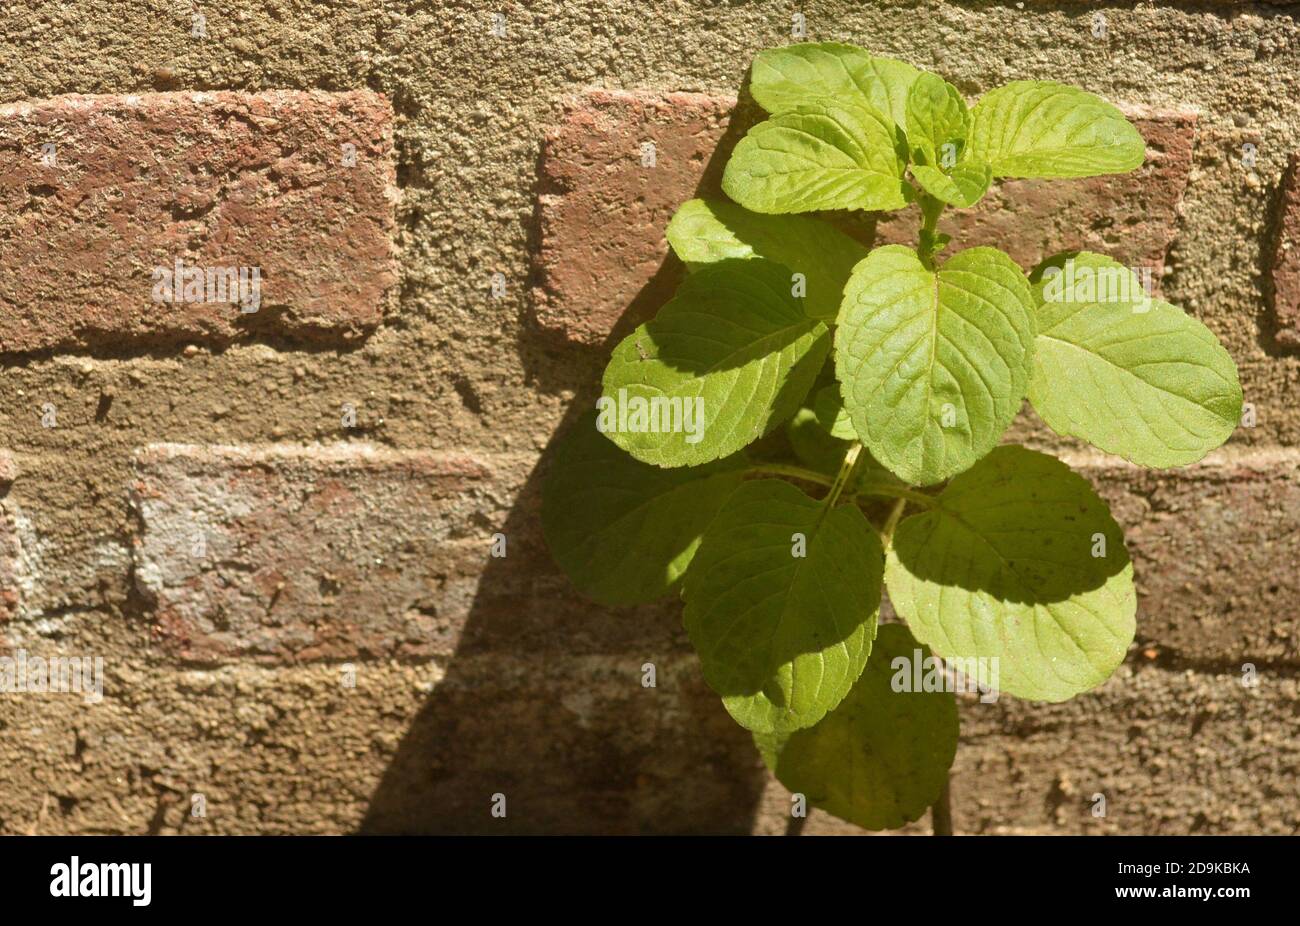 Mint plant in vegetative stage against brick wall Stock Photo